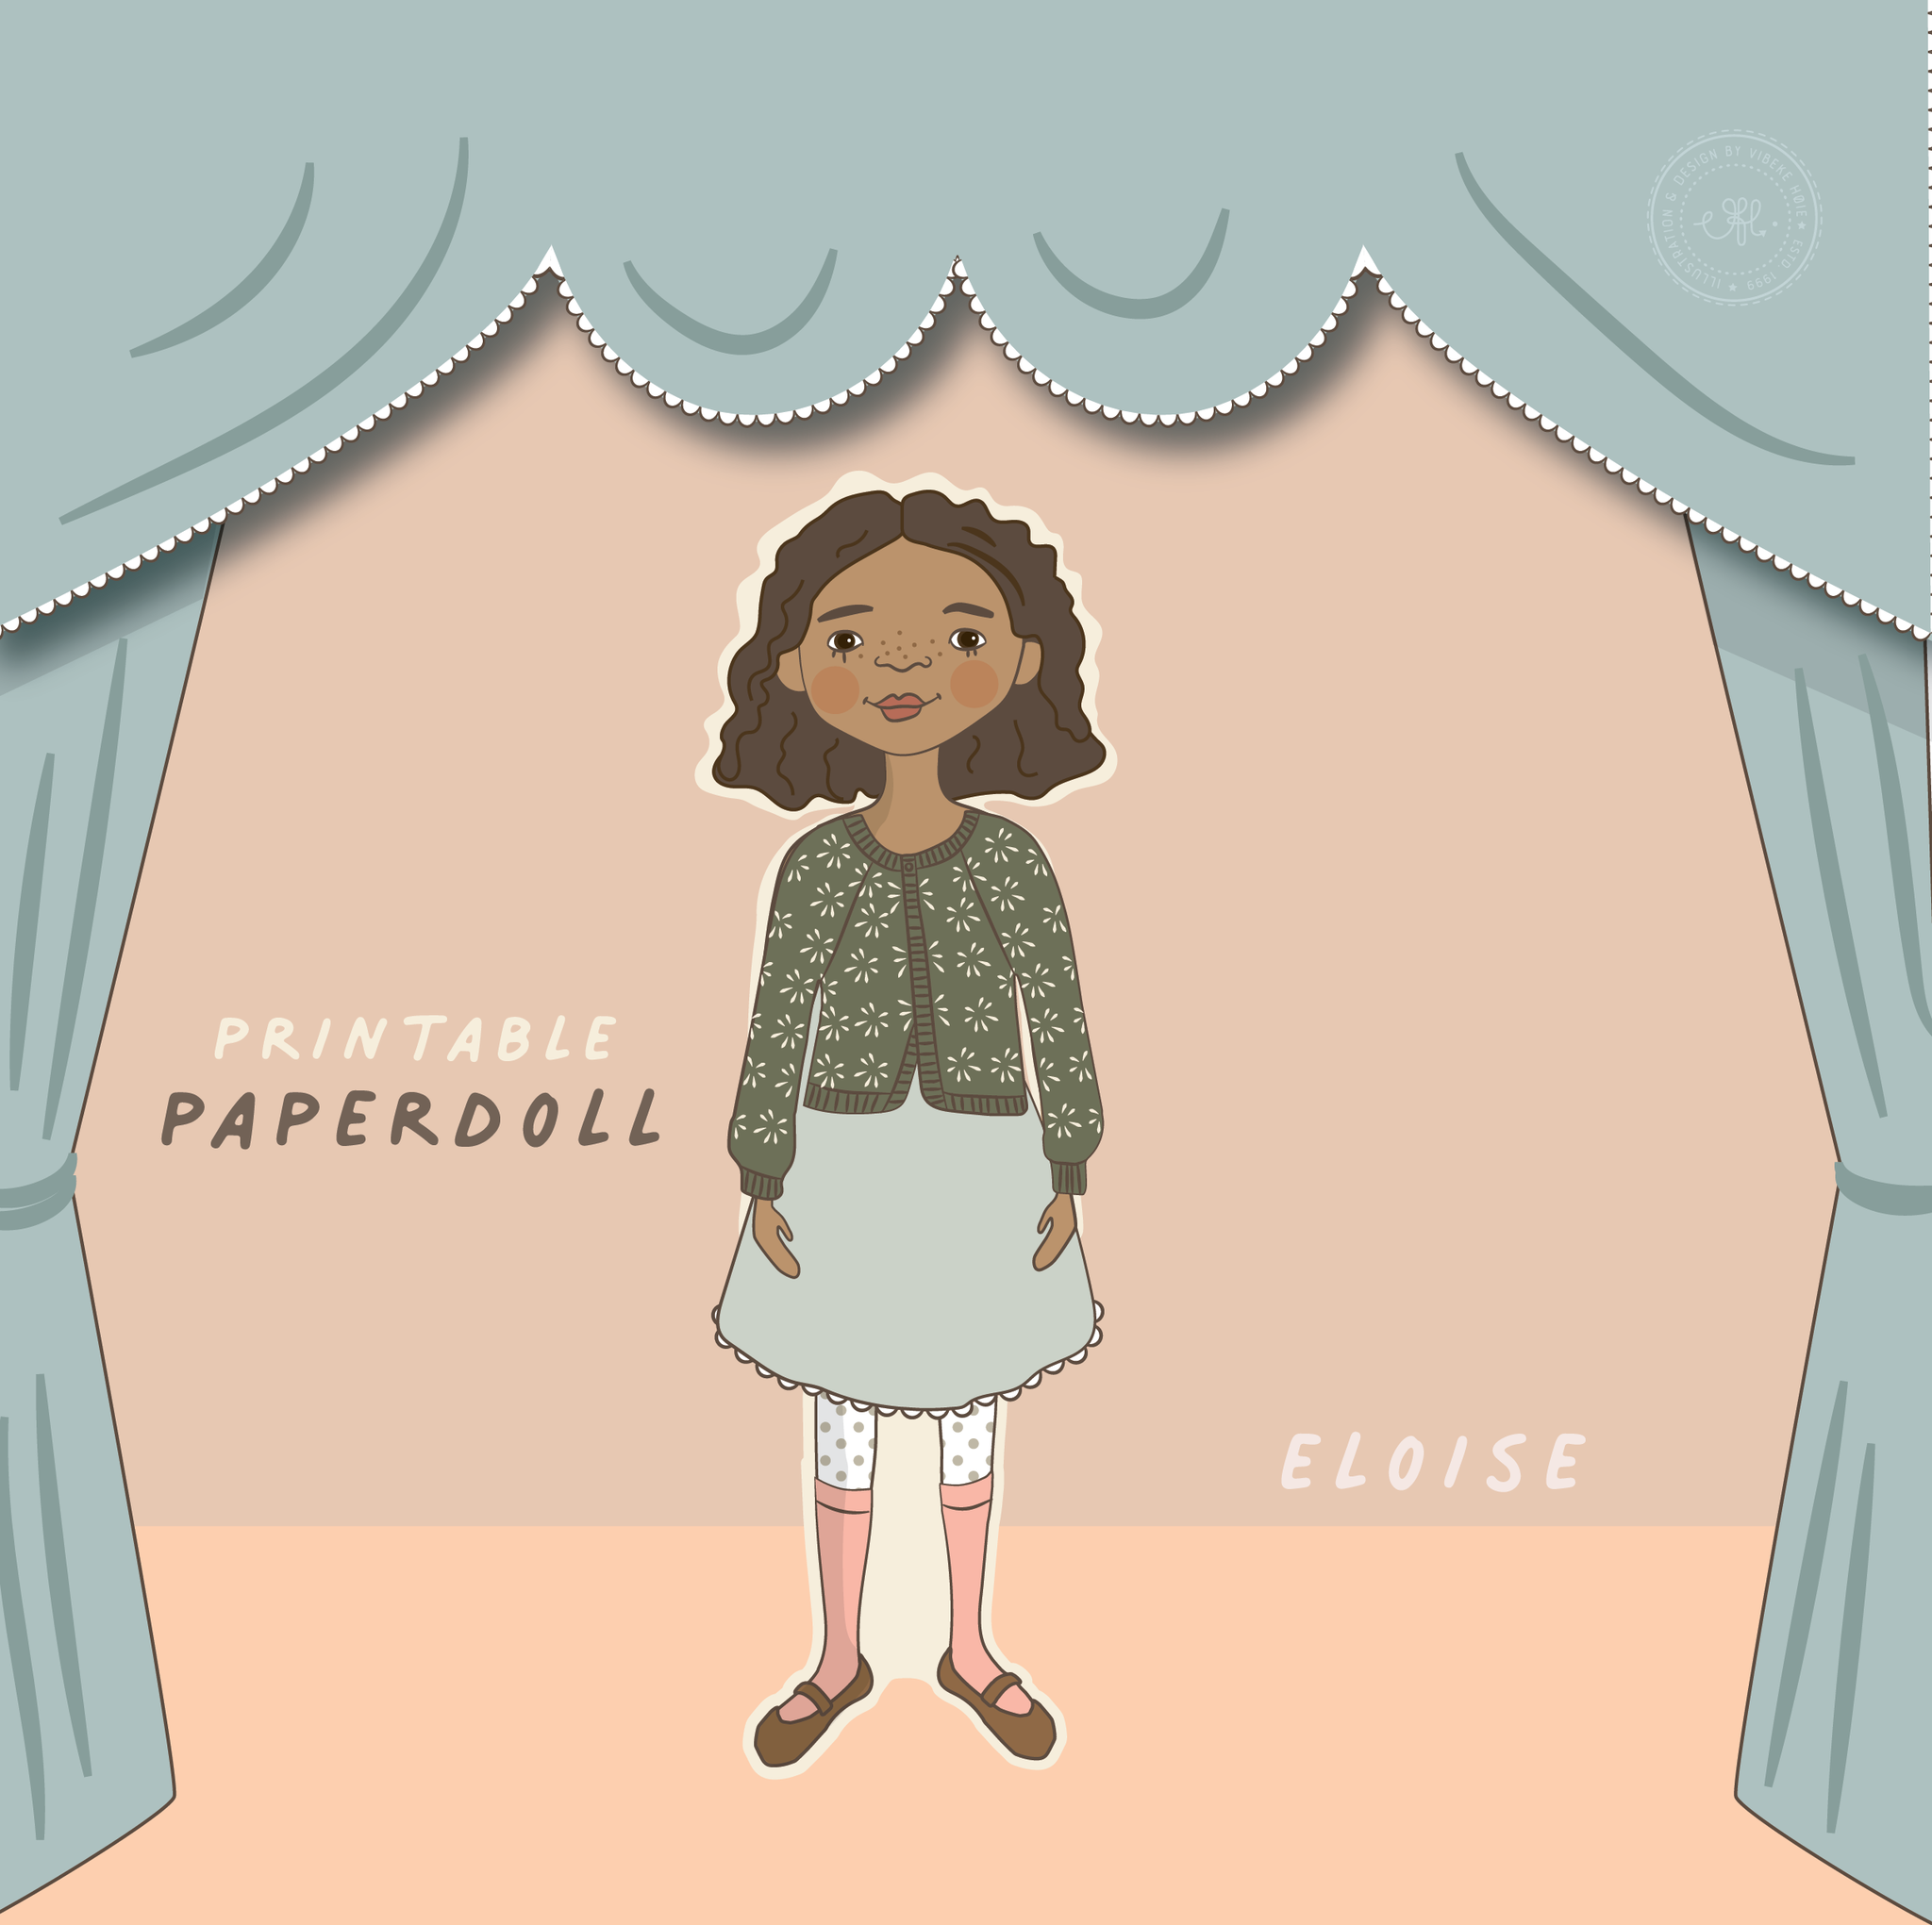 The Paperdoll - Eloise